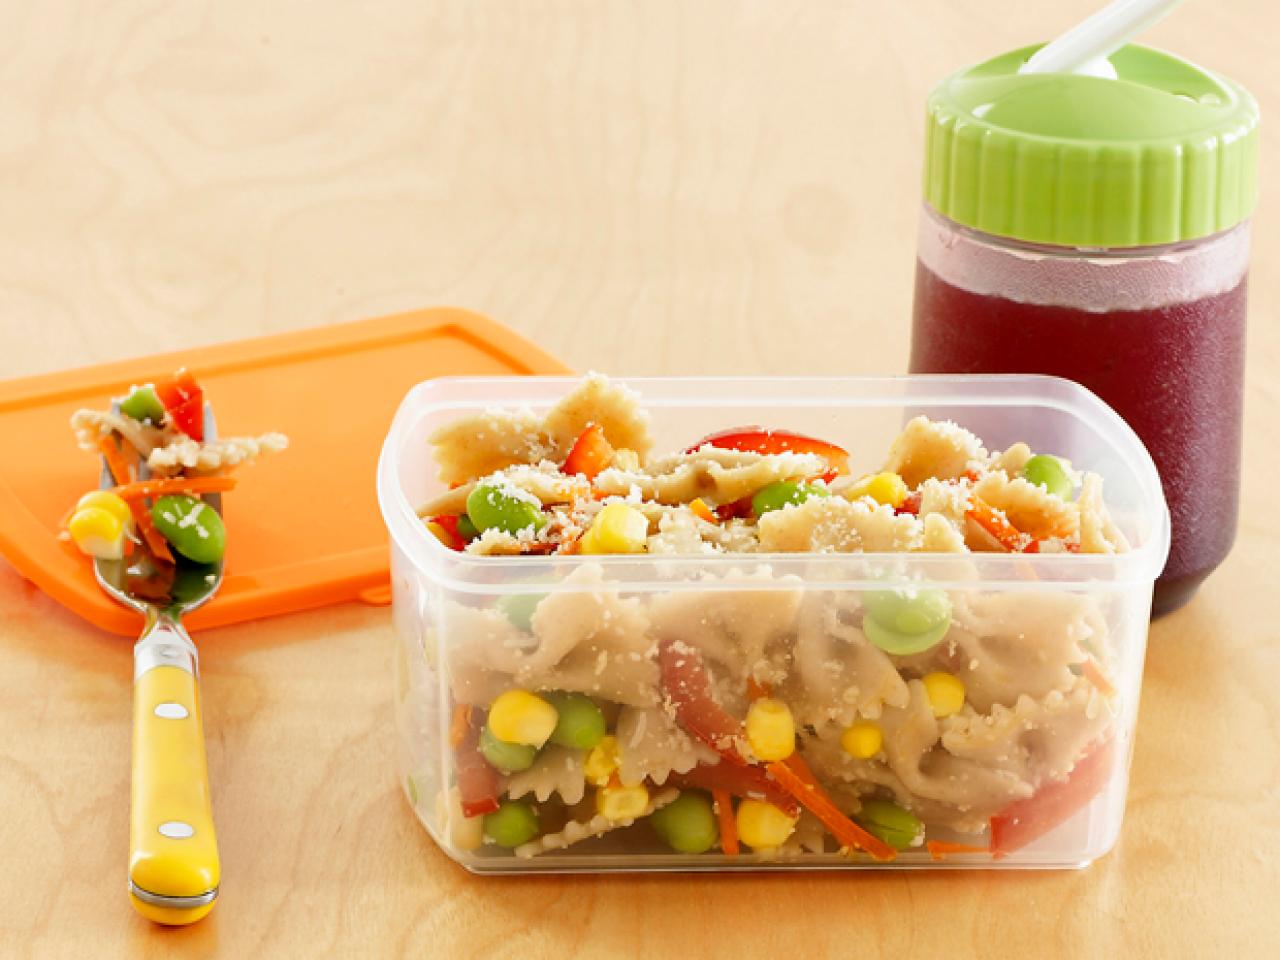 Packed Lunch Ideas: Not Just for Kids!